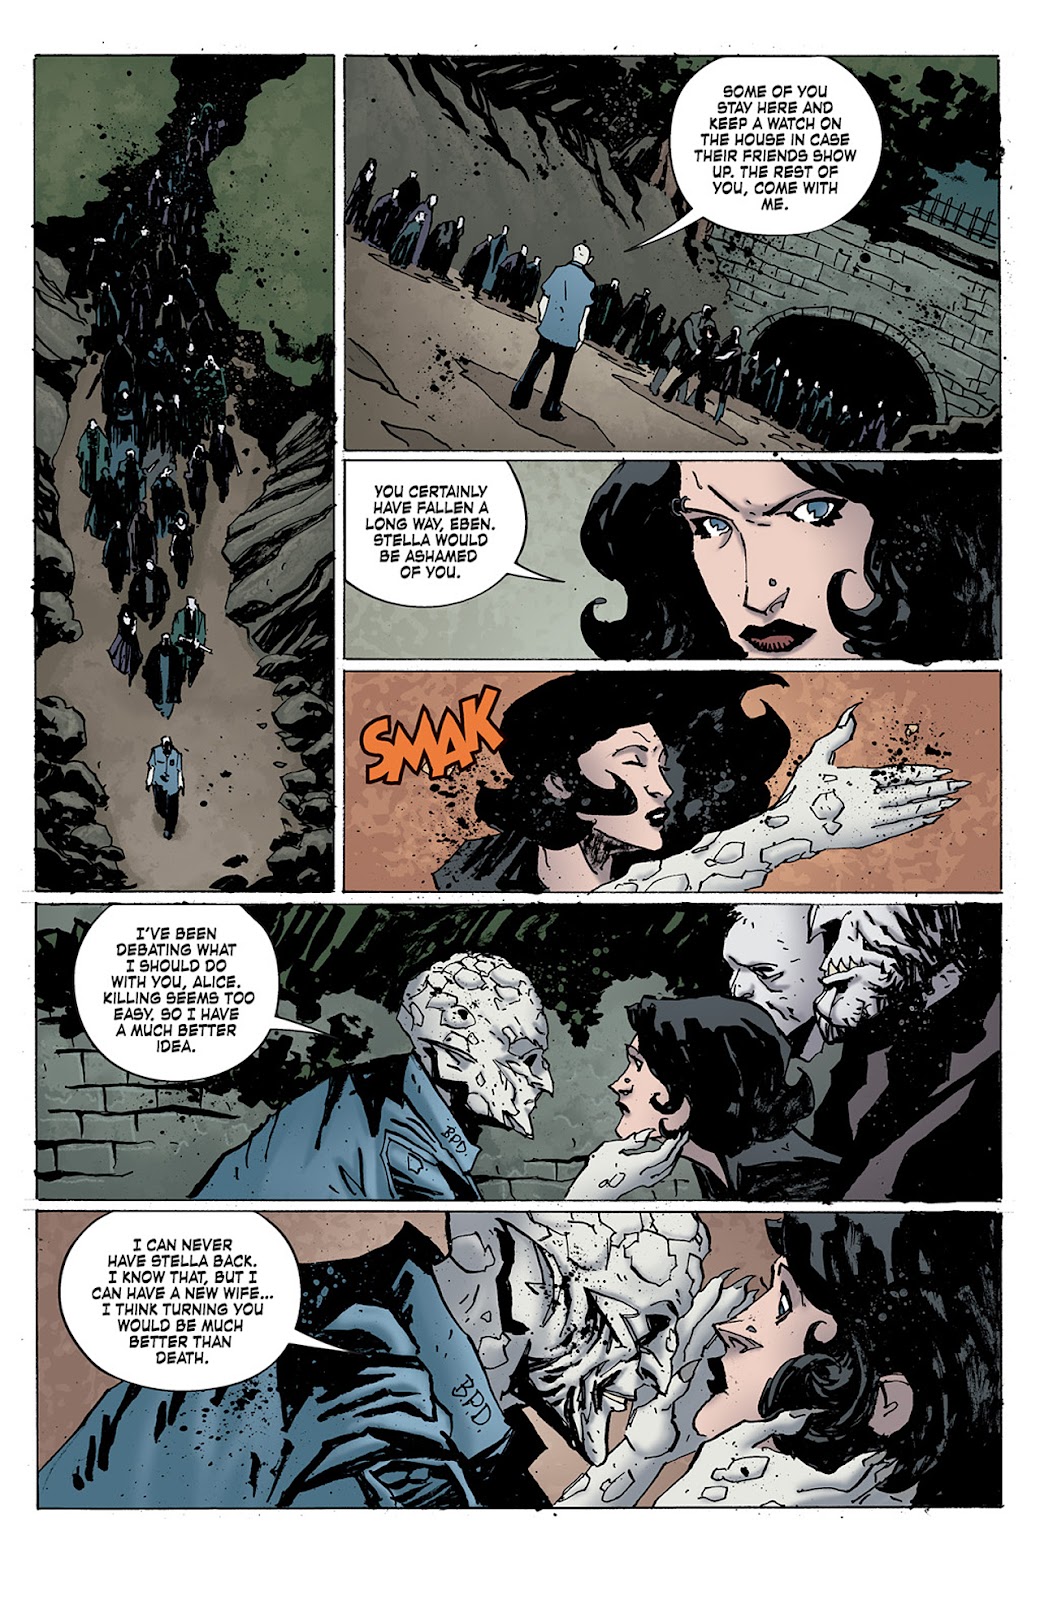 Criminal Macabre: Final Night - The 30 Days of Night Crossover issue 3 - Page 21